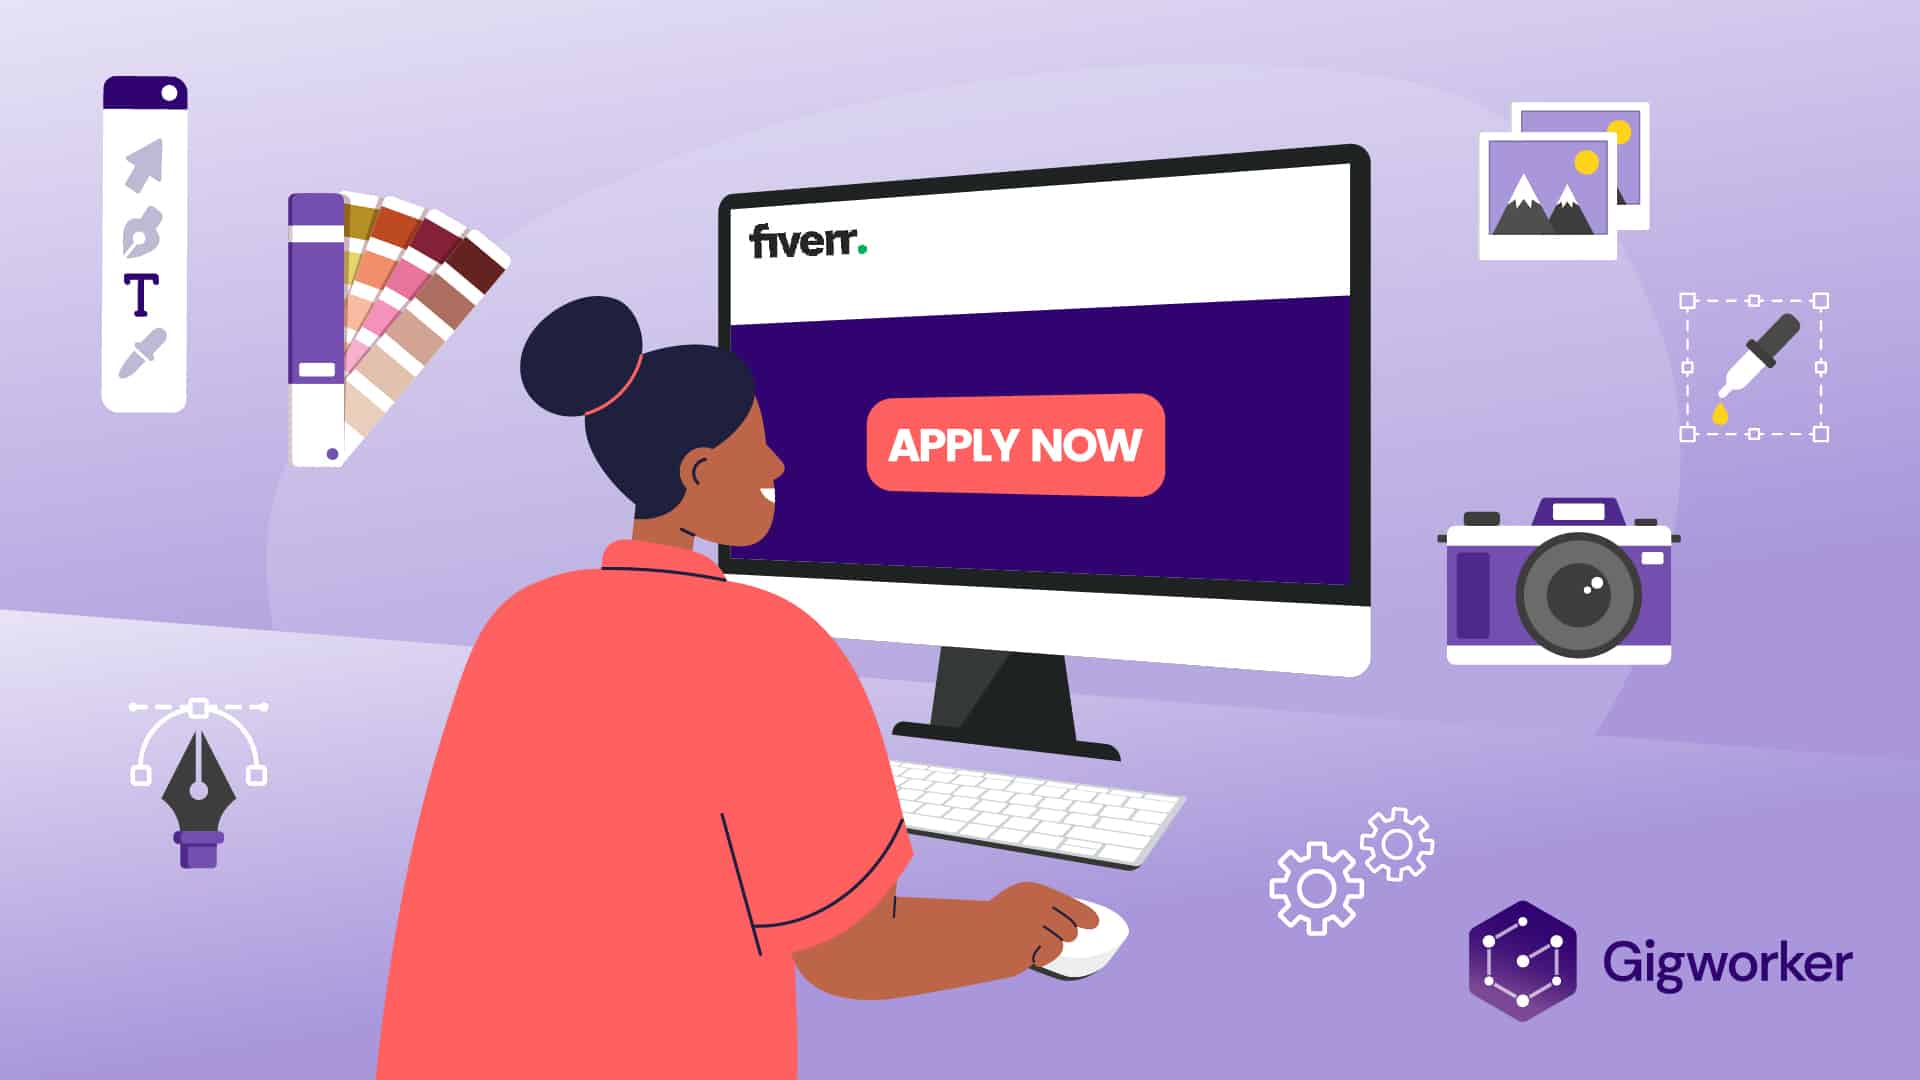 vector graphic showing an illustration of a lady searching for fiver jobs on a desktop